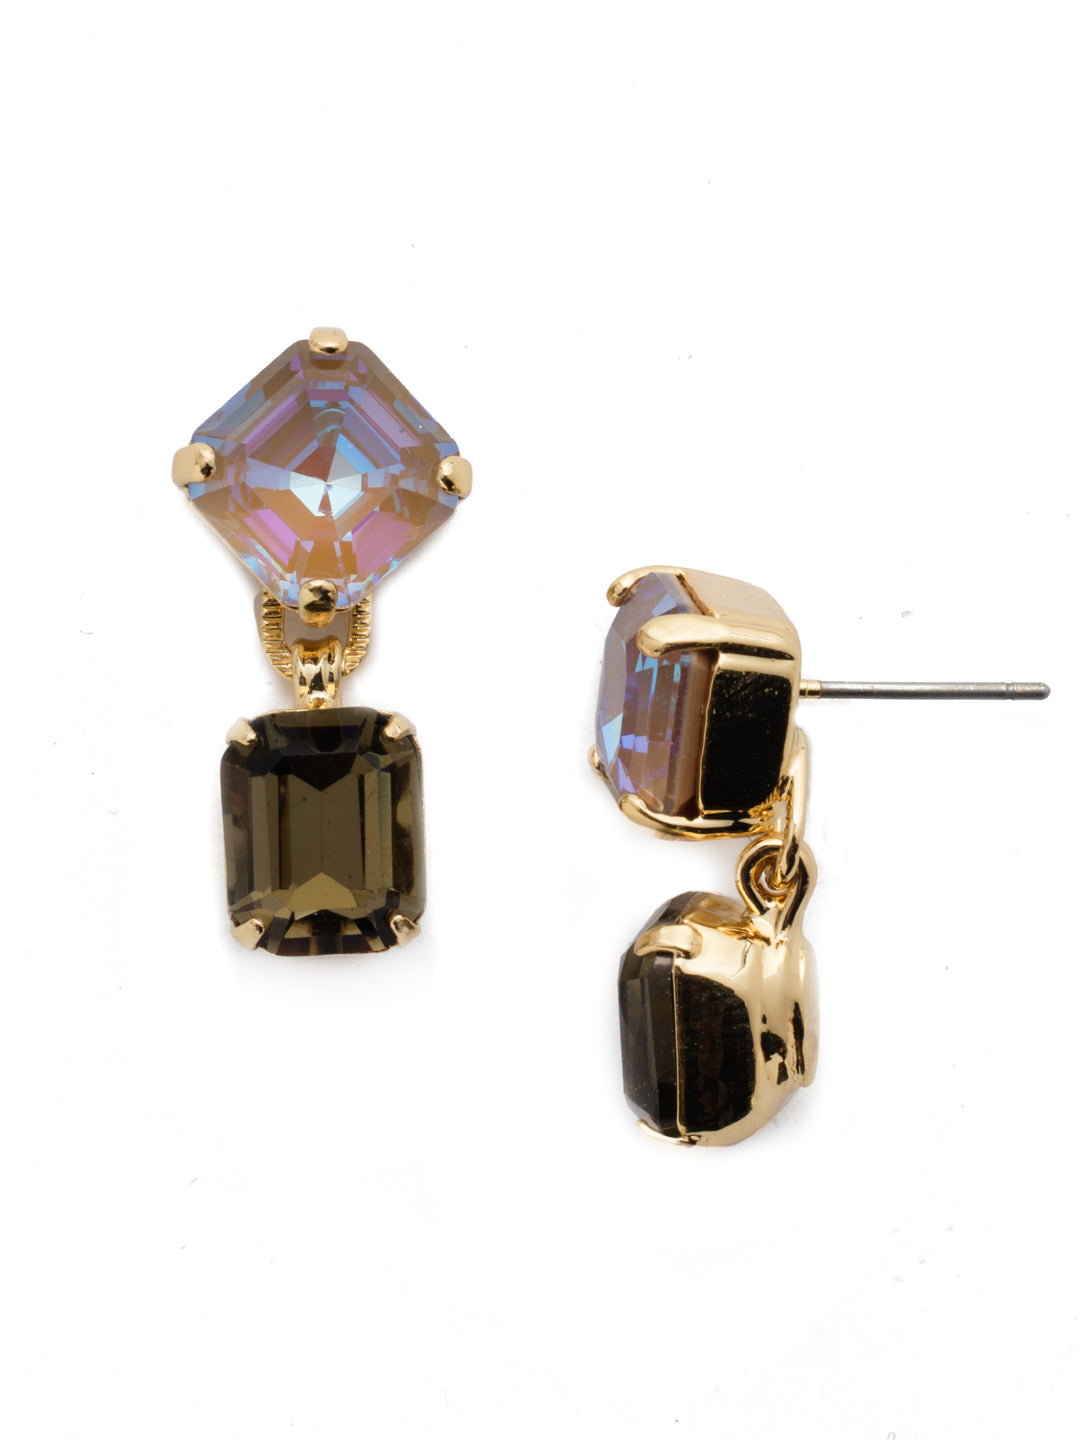 Ansley Dangle Earrings - EET18BGCSM - The Ansley Dangle Earrings feature a sparkling oval crystal with a dangling opaque circular stone. It's a pretty pair. From Sorrelli's Cashmere collection in our Bright Gold-tone finish.